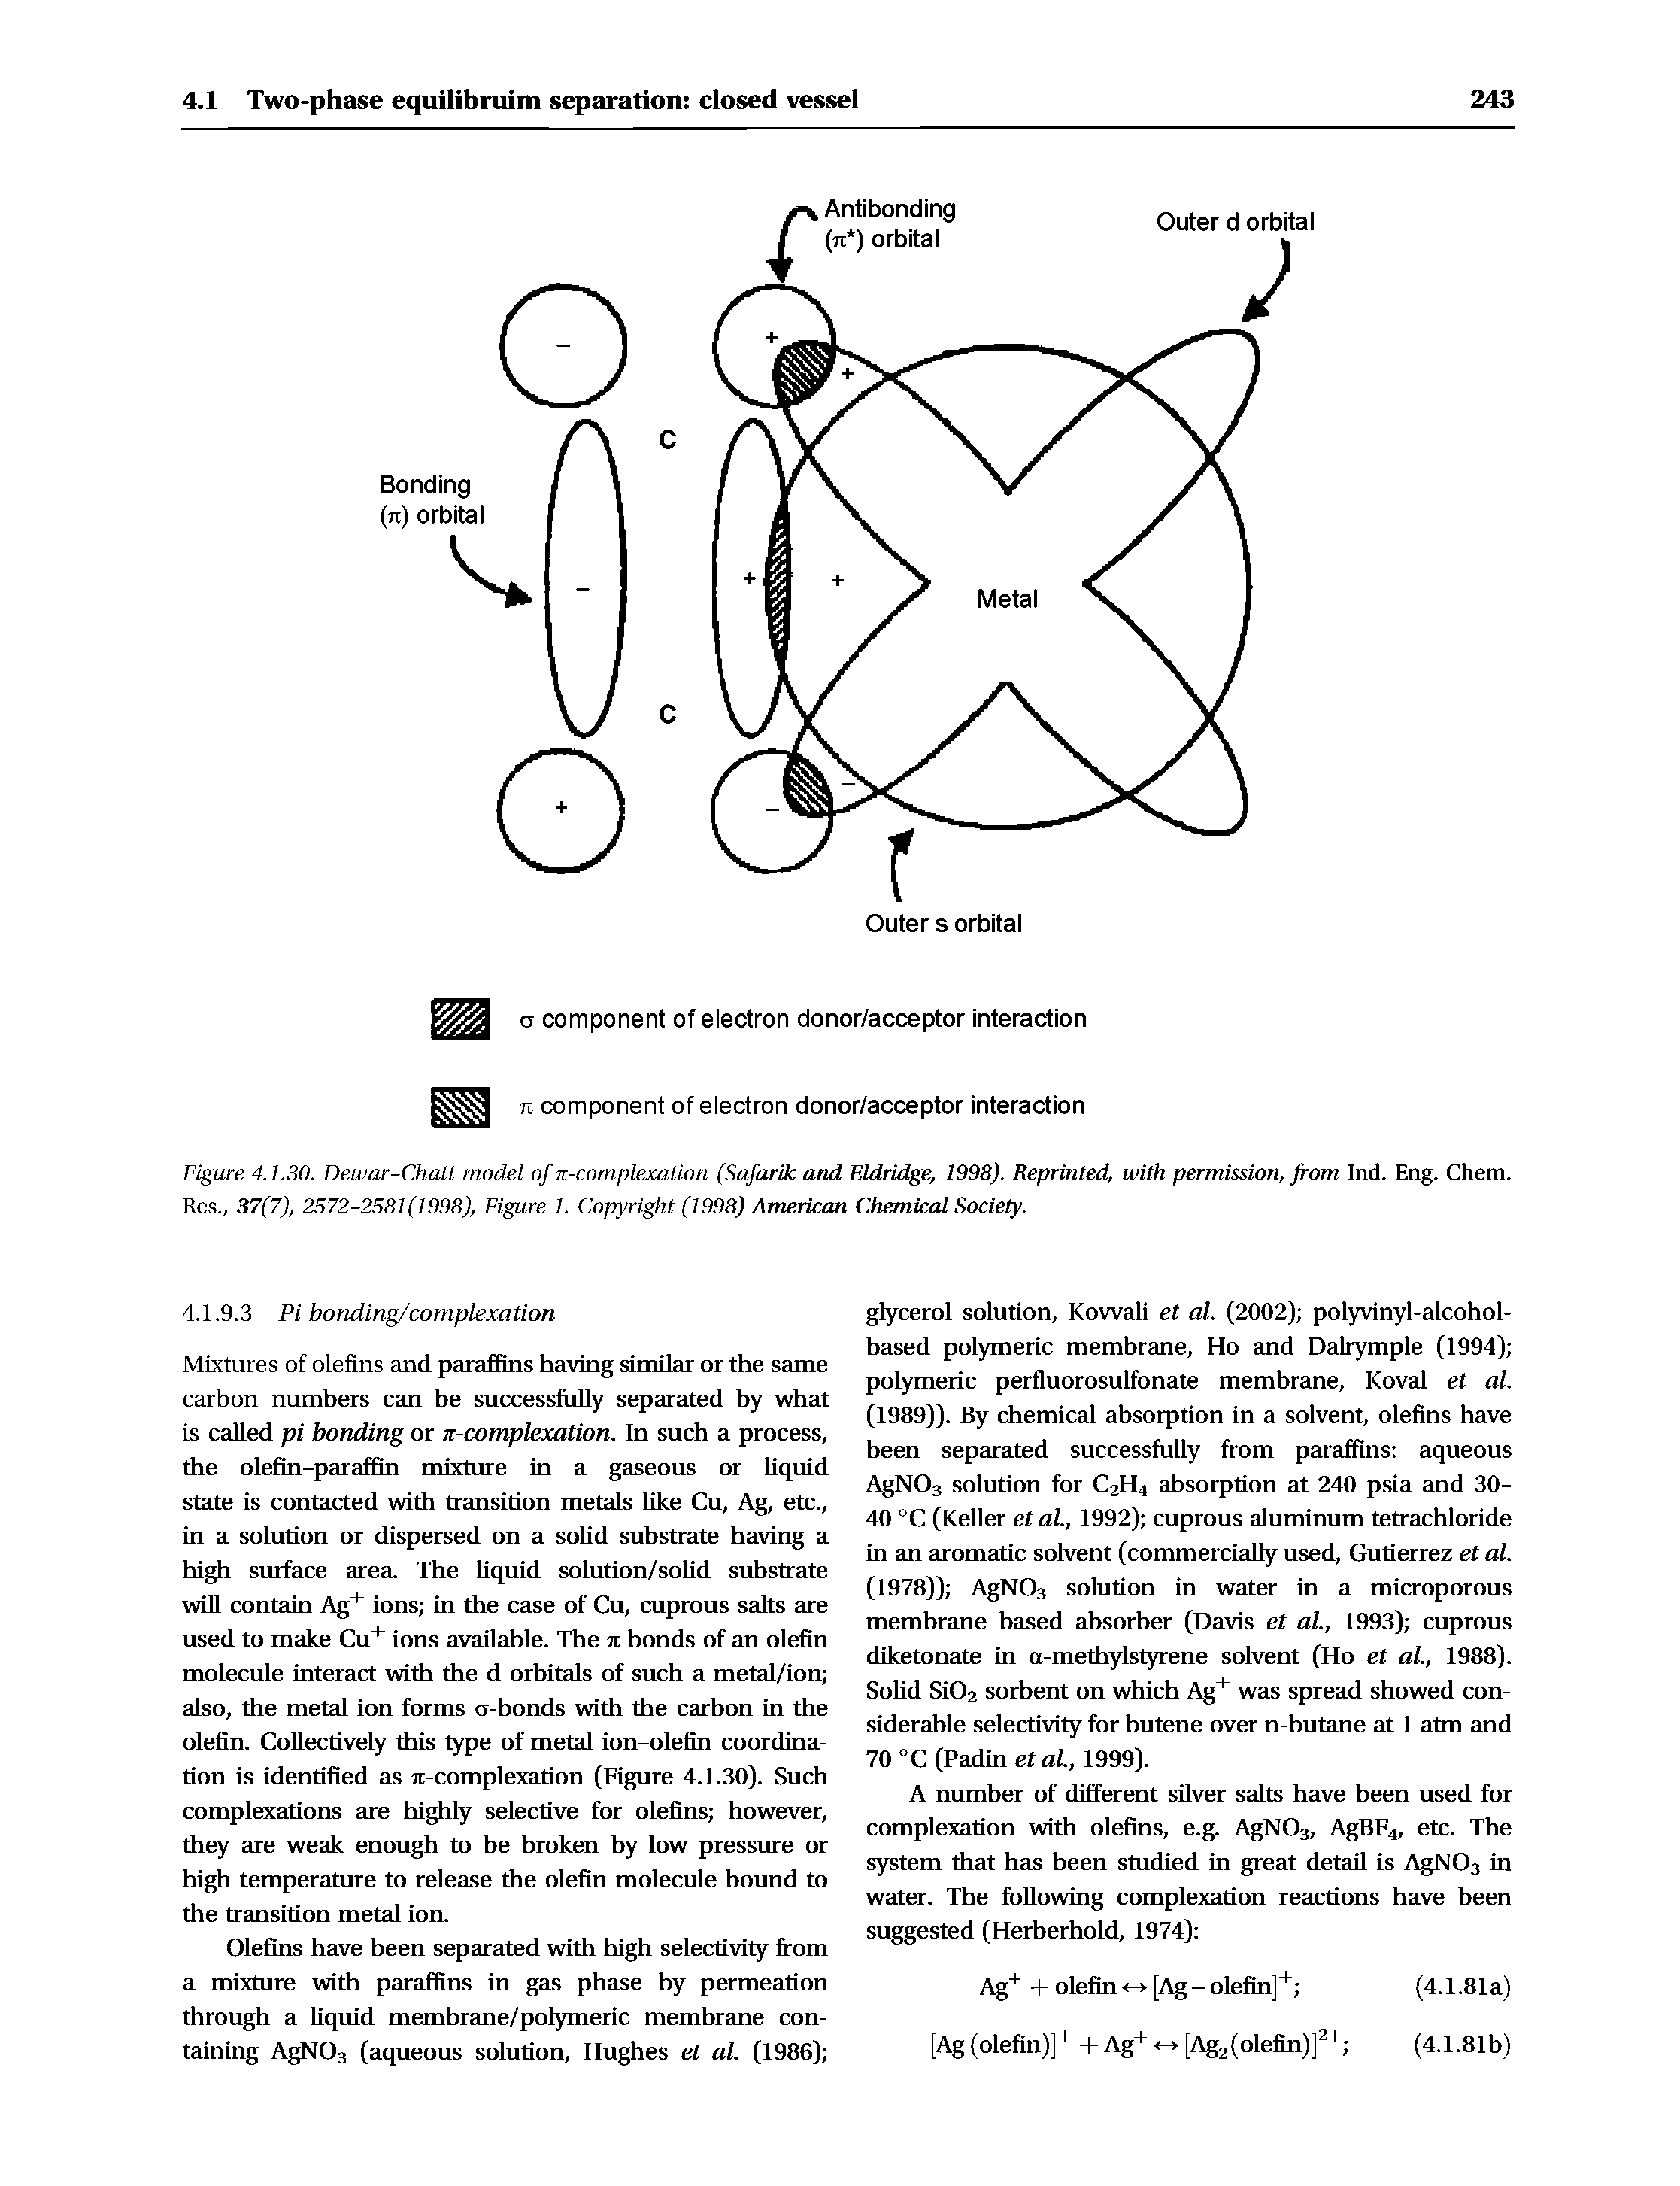 Figure 4.1.30. Dewar-Chatt model of it-complexation (Safarik and Eldridge, 1998). Reprinted, with permission, from Ind. Eng. Chem. Res., 37(7), 2572-2581(1998), Figure 1. Copyri t (1998) American Chemical Society.